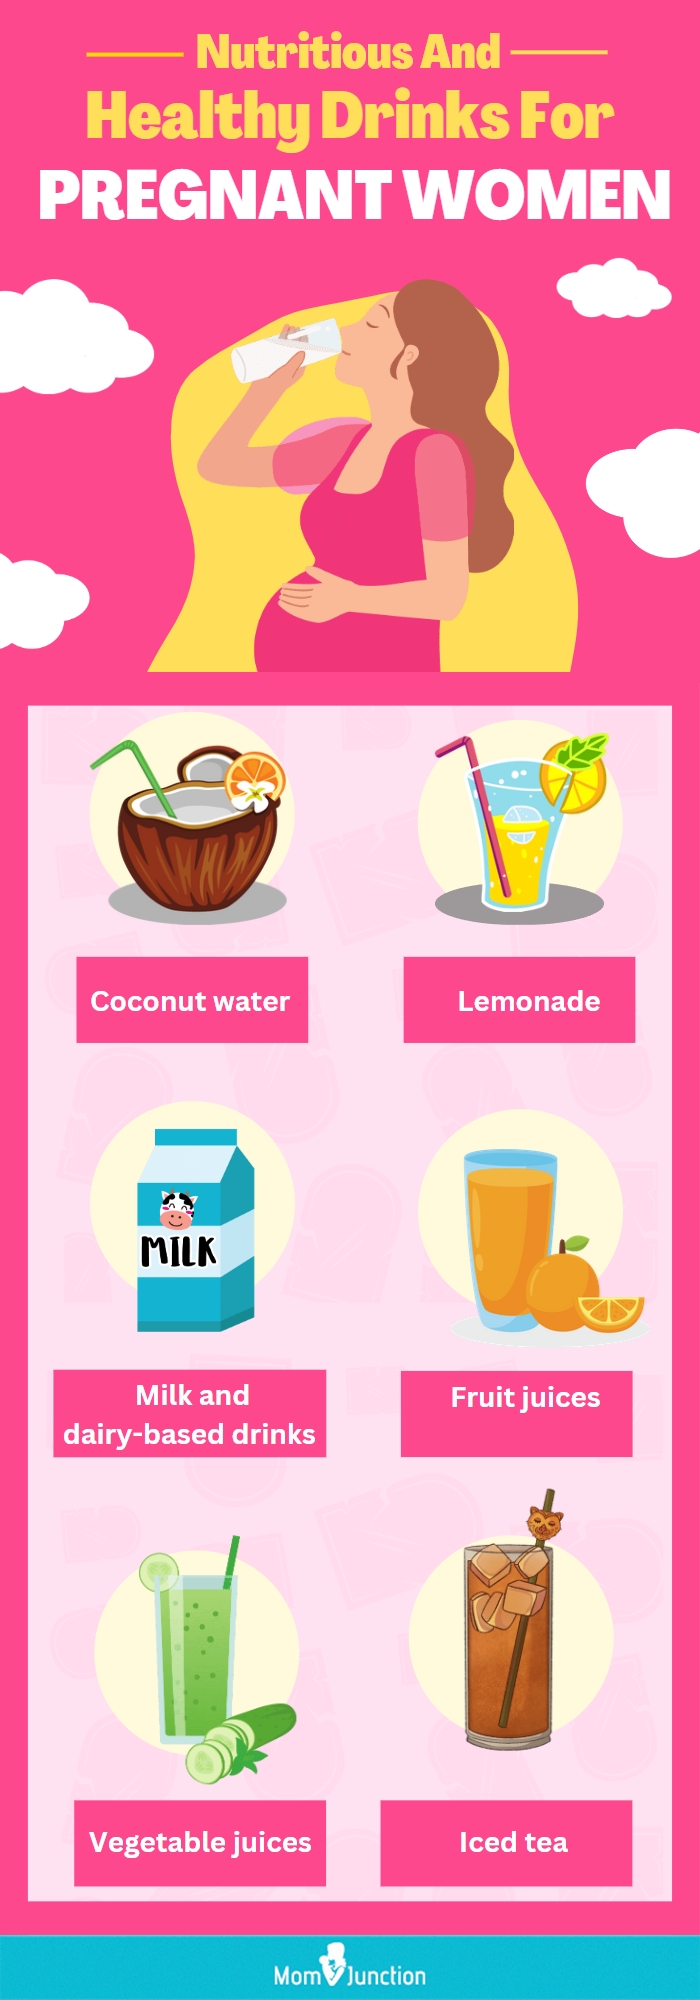 nutritious and healthy drinks for pregnant women (infographic)